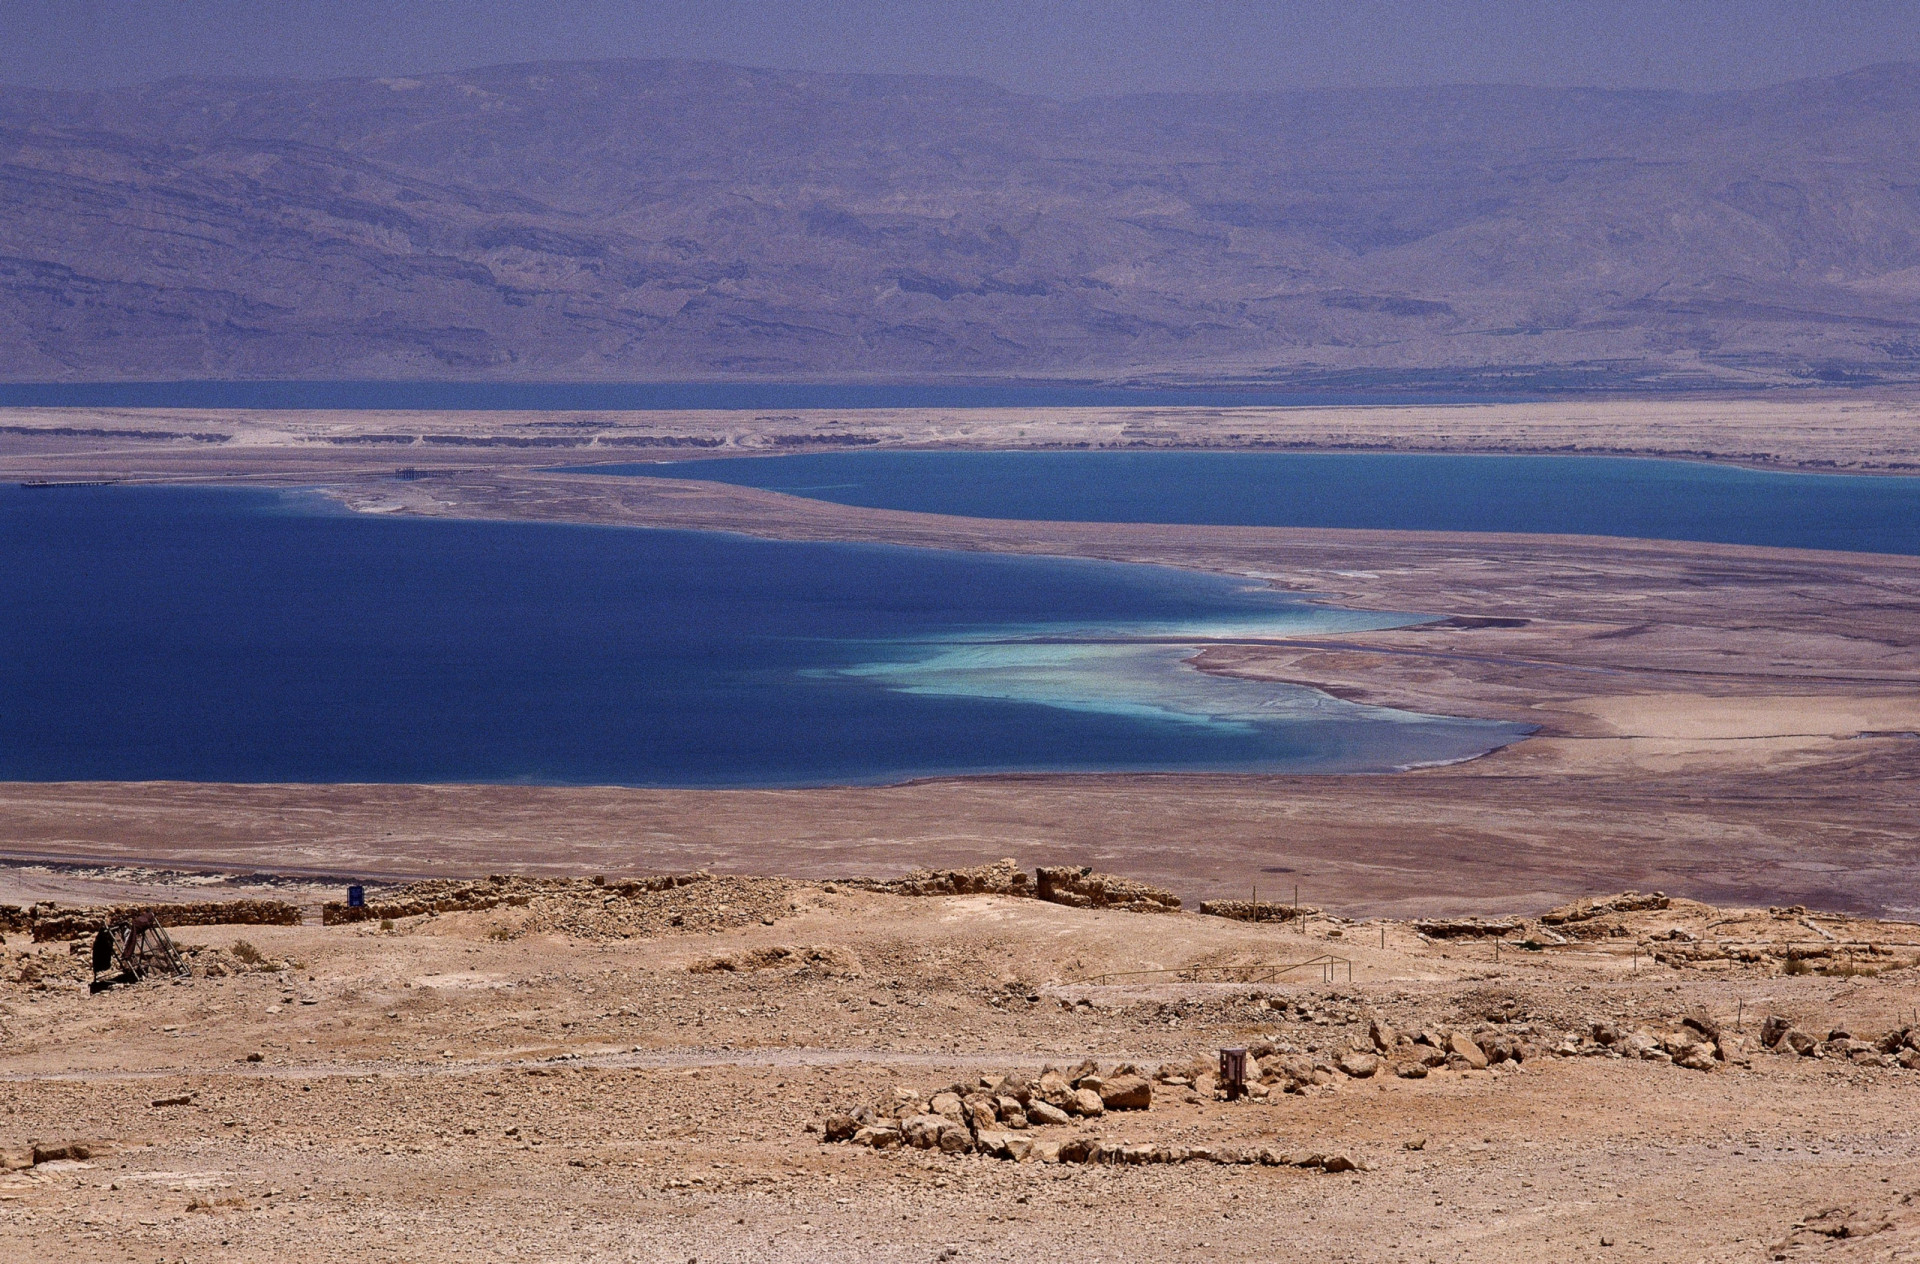 <p>Over time, the Dead Sea's level has fluctuated dramatically, rising to its highest level around 26,000 years ago. But some 18,000 years ago its outlet to the sea evaporated.</p><p><a href="https://www.msn.com/en-us/community/channel/vid-7xx8mnucu55yw63we9va2gwr7uihbxwc68fxqp25x6tg4ftibpra?cvid=94631541bc0f4f89bfd59158d696ad7e">Follow us and access great exclusive content every day</a></p>